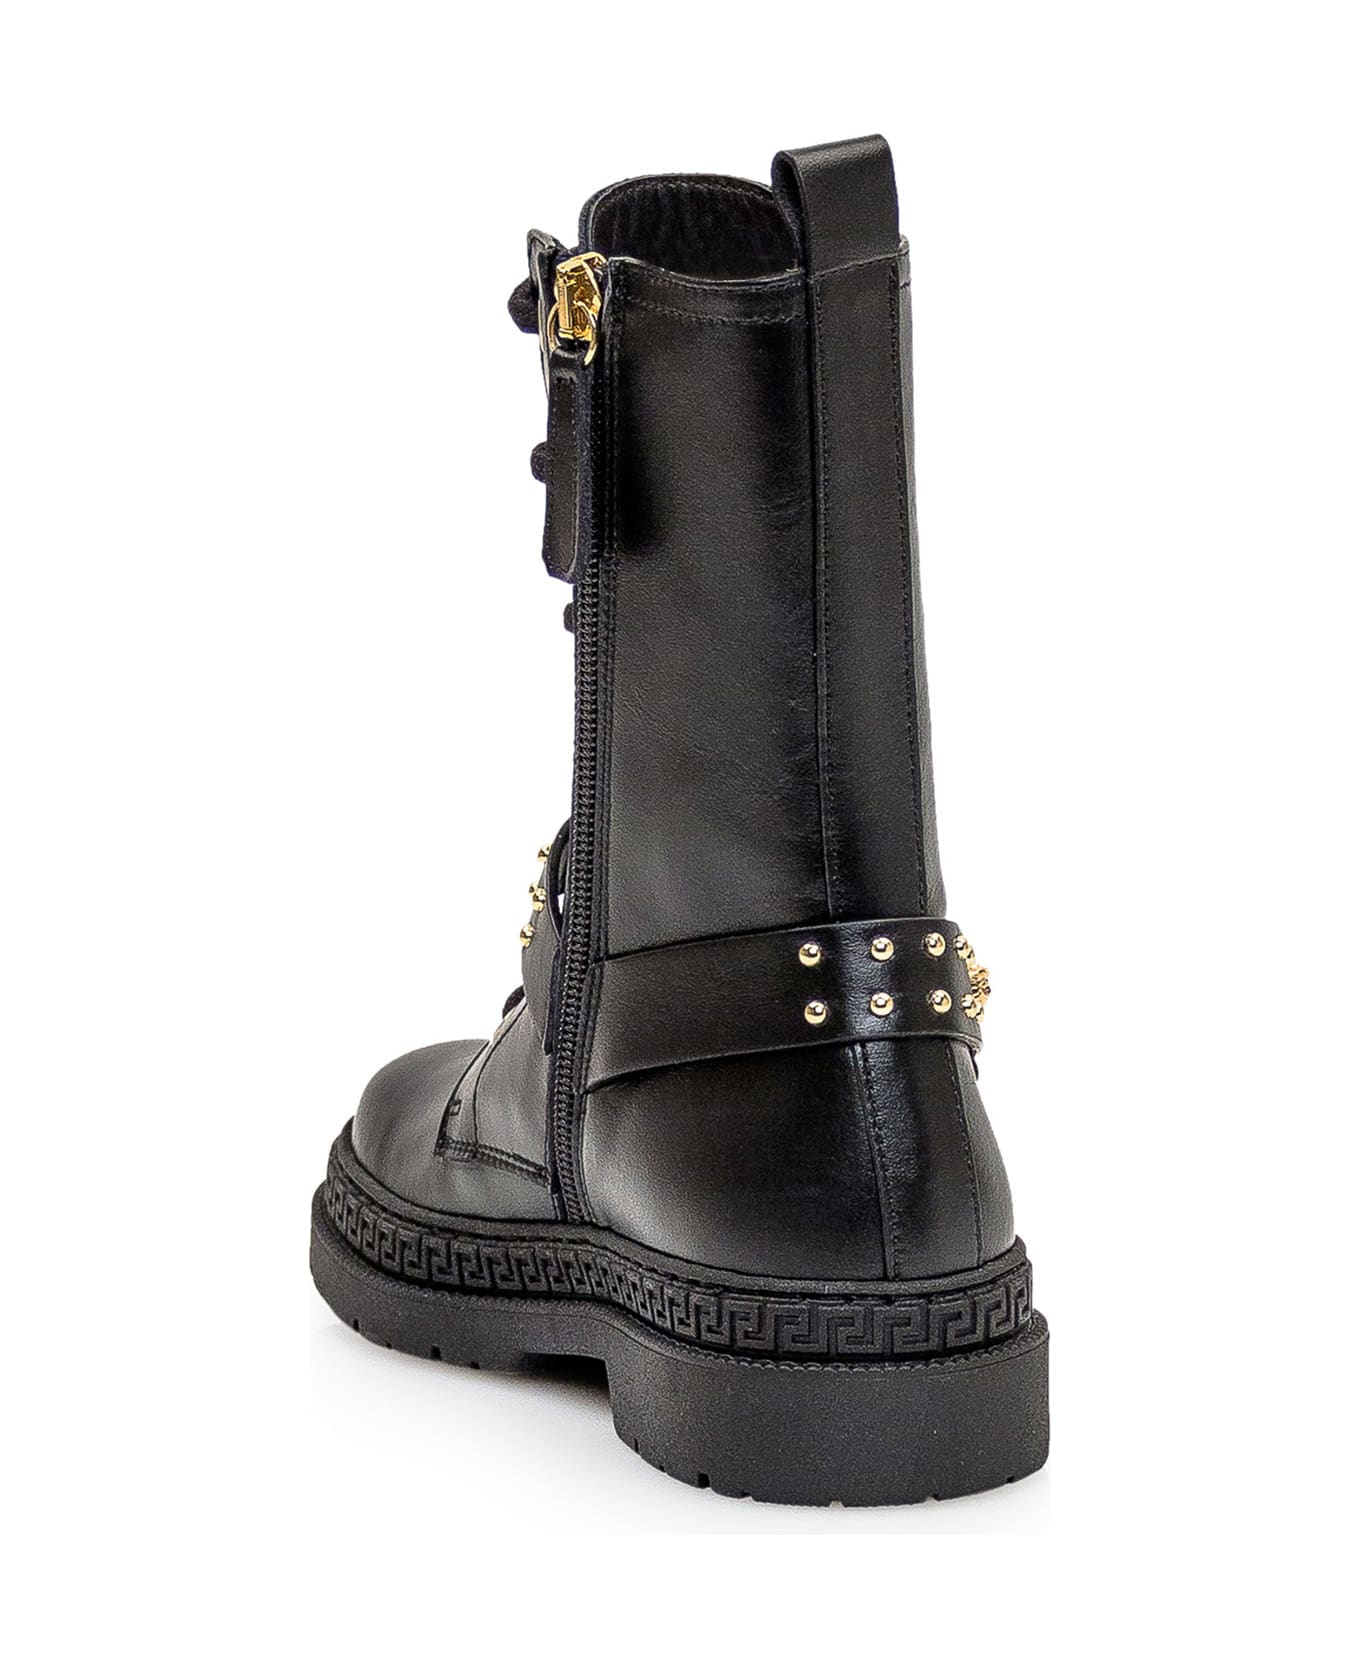 Versace Motorcycle Boots From Medusa - BLACK-VERSACE GOLD シューズ